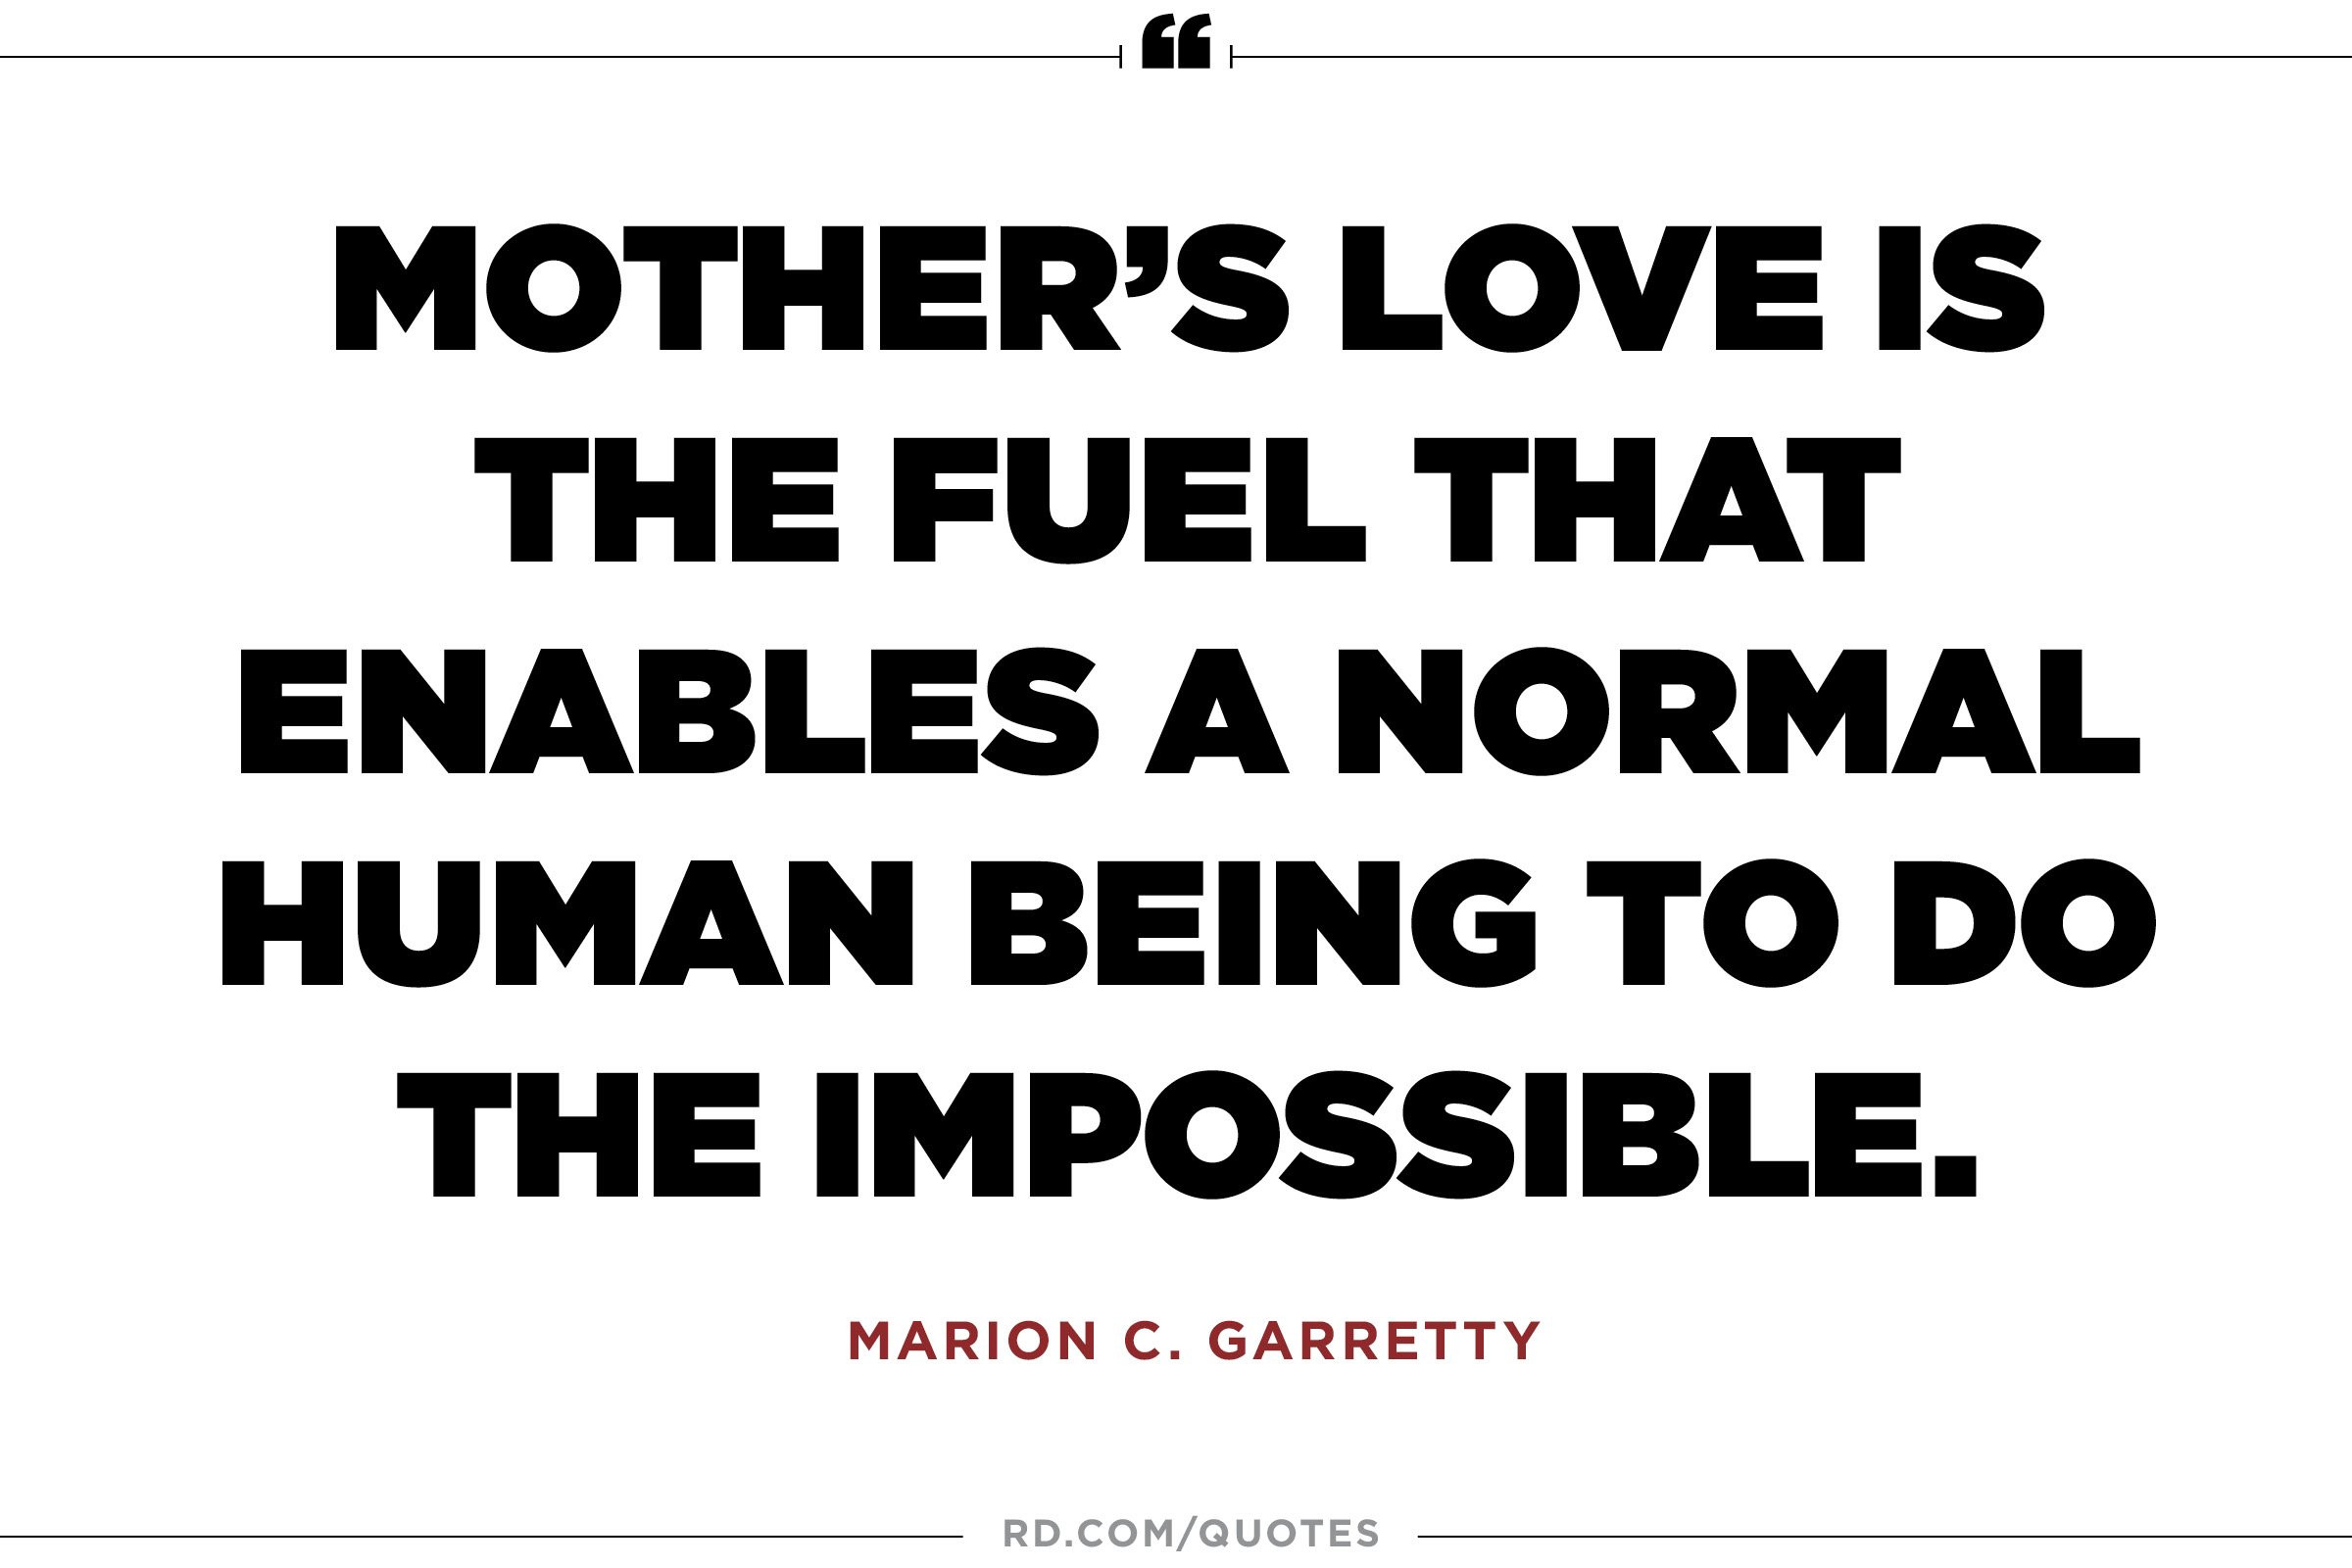 Quotes About Motherhood
 11 Quotes About Mothers That ll Make You Call Yours